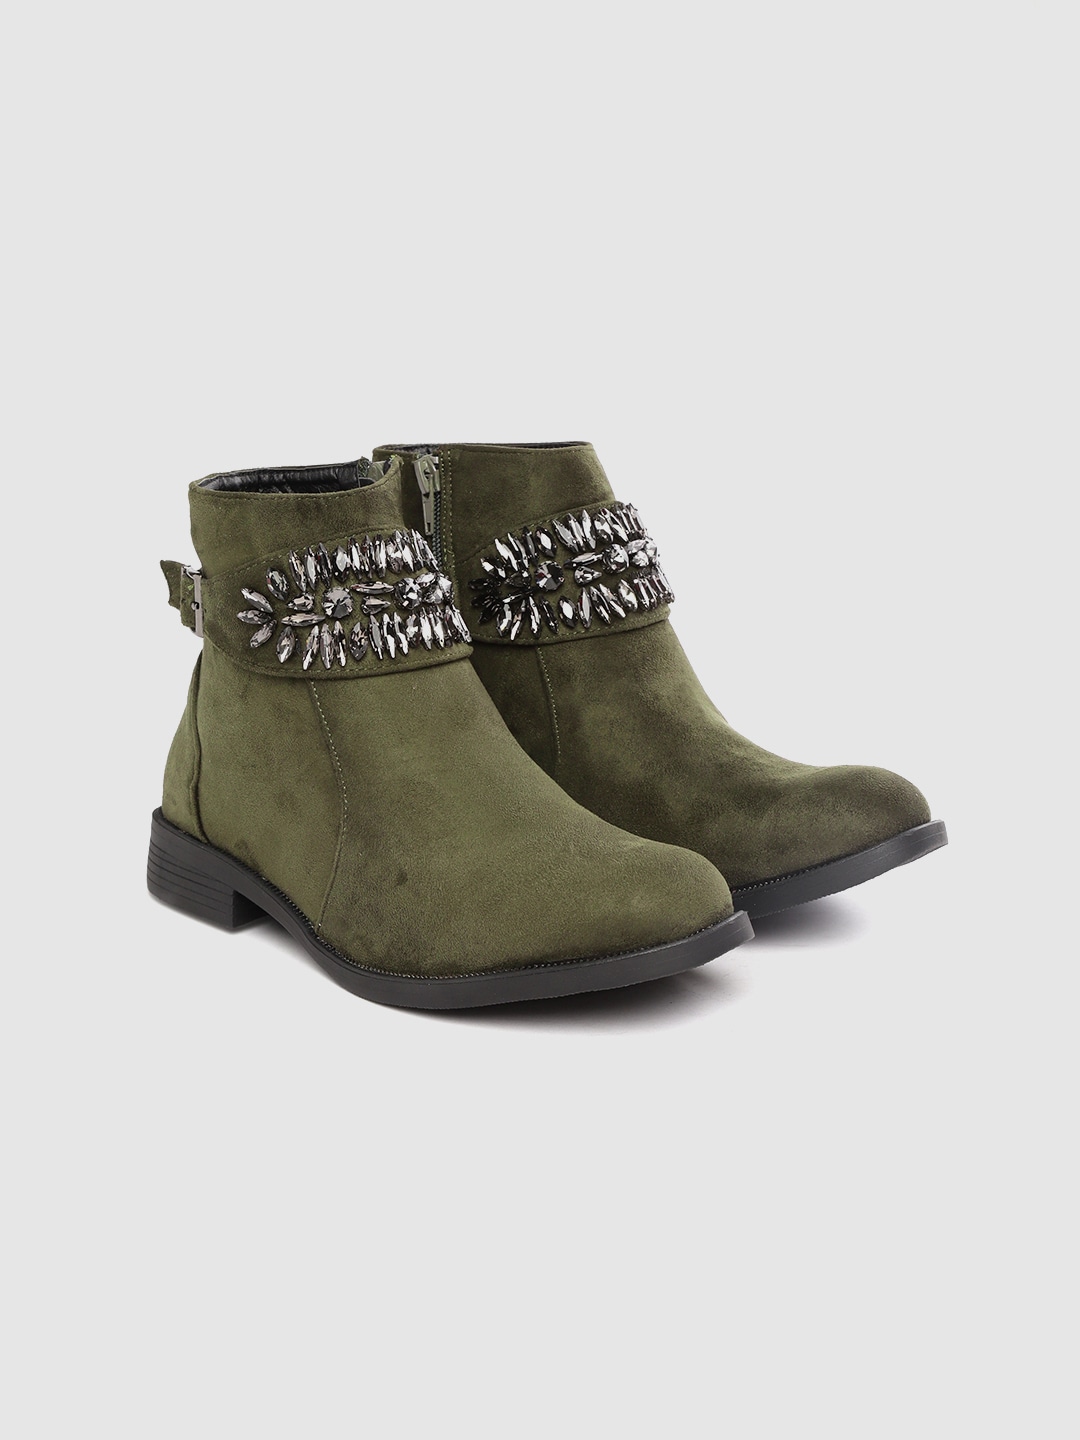 Lavie Women Olive Green Embellished Mid-Top Flat Boots Price in India